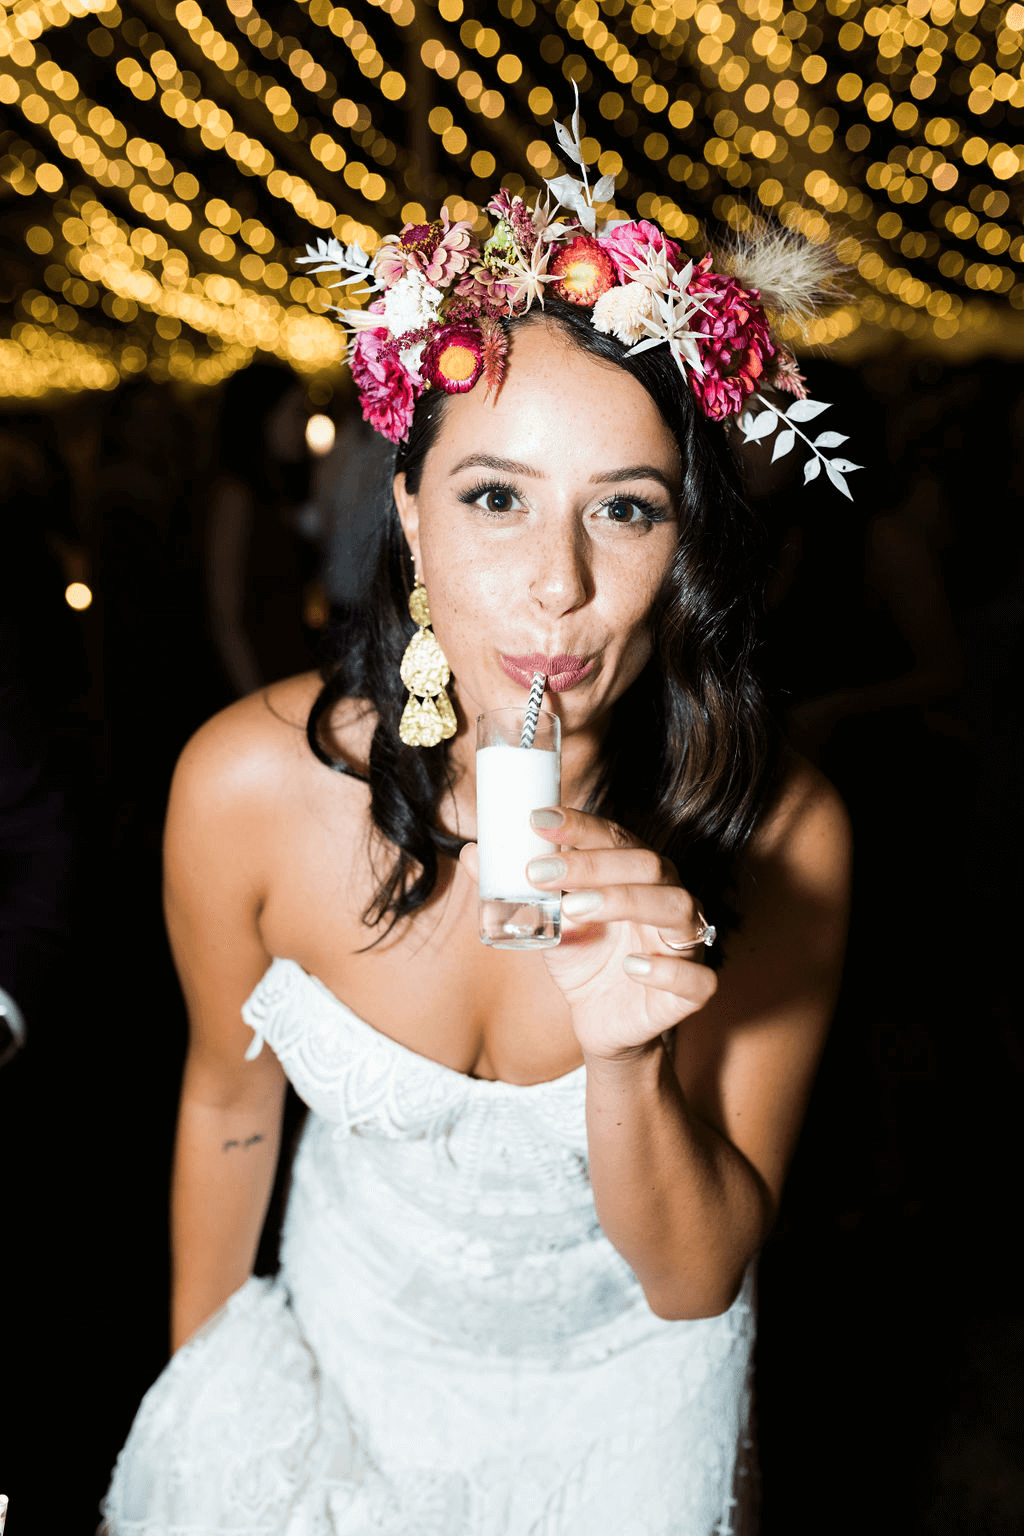 Bride looks at camera while sipping from a shot glass